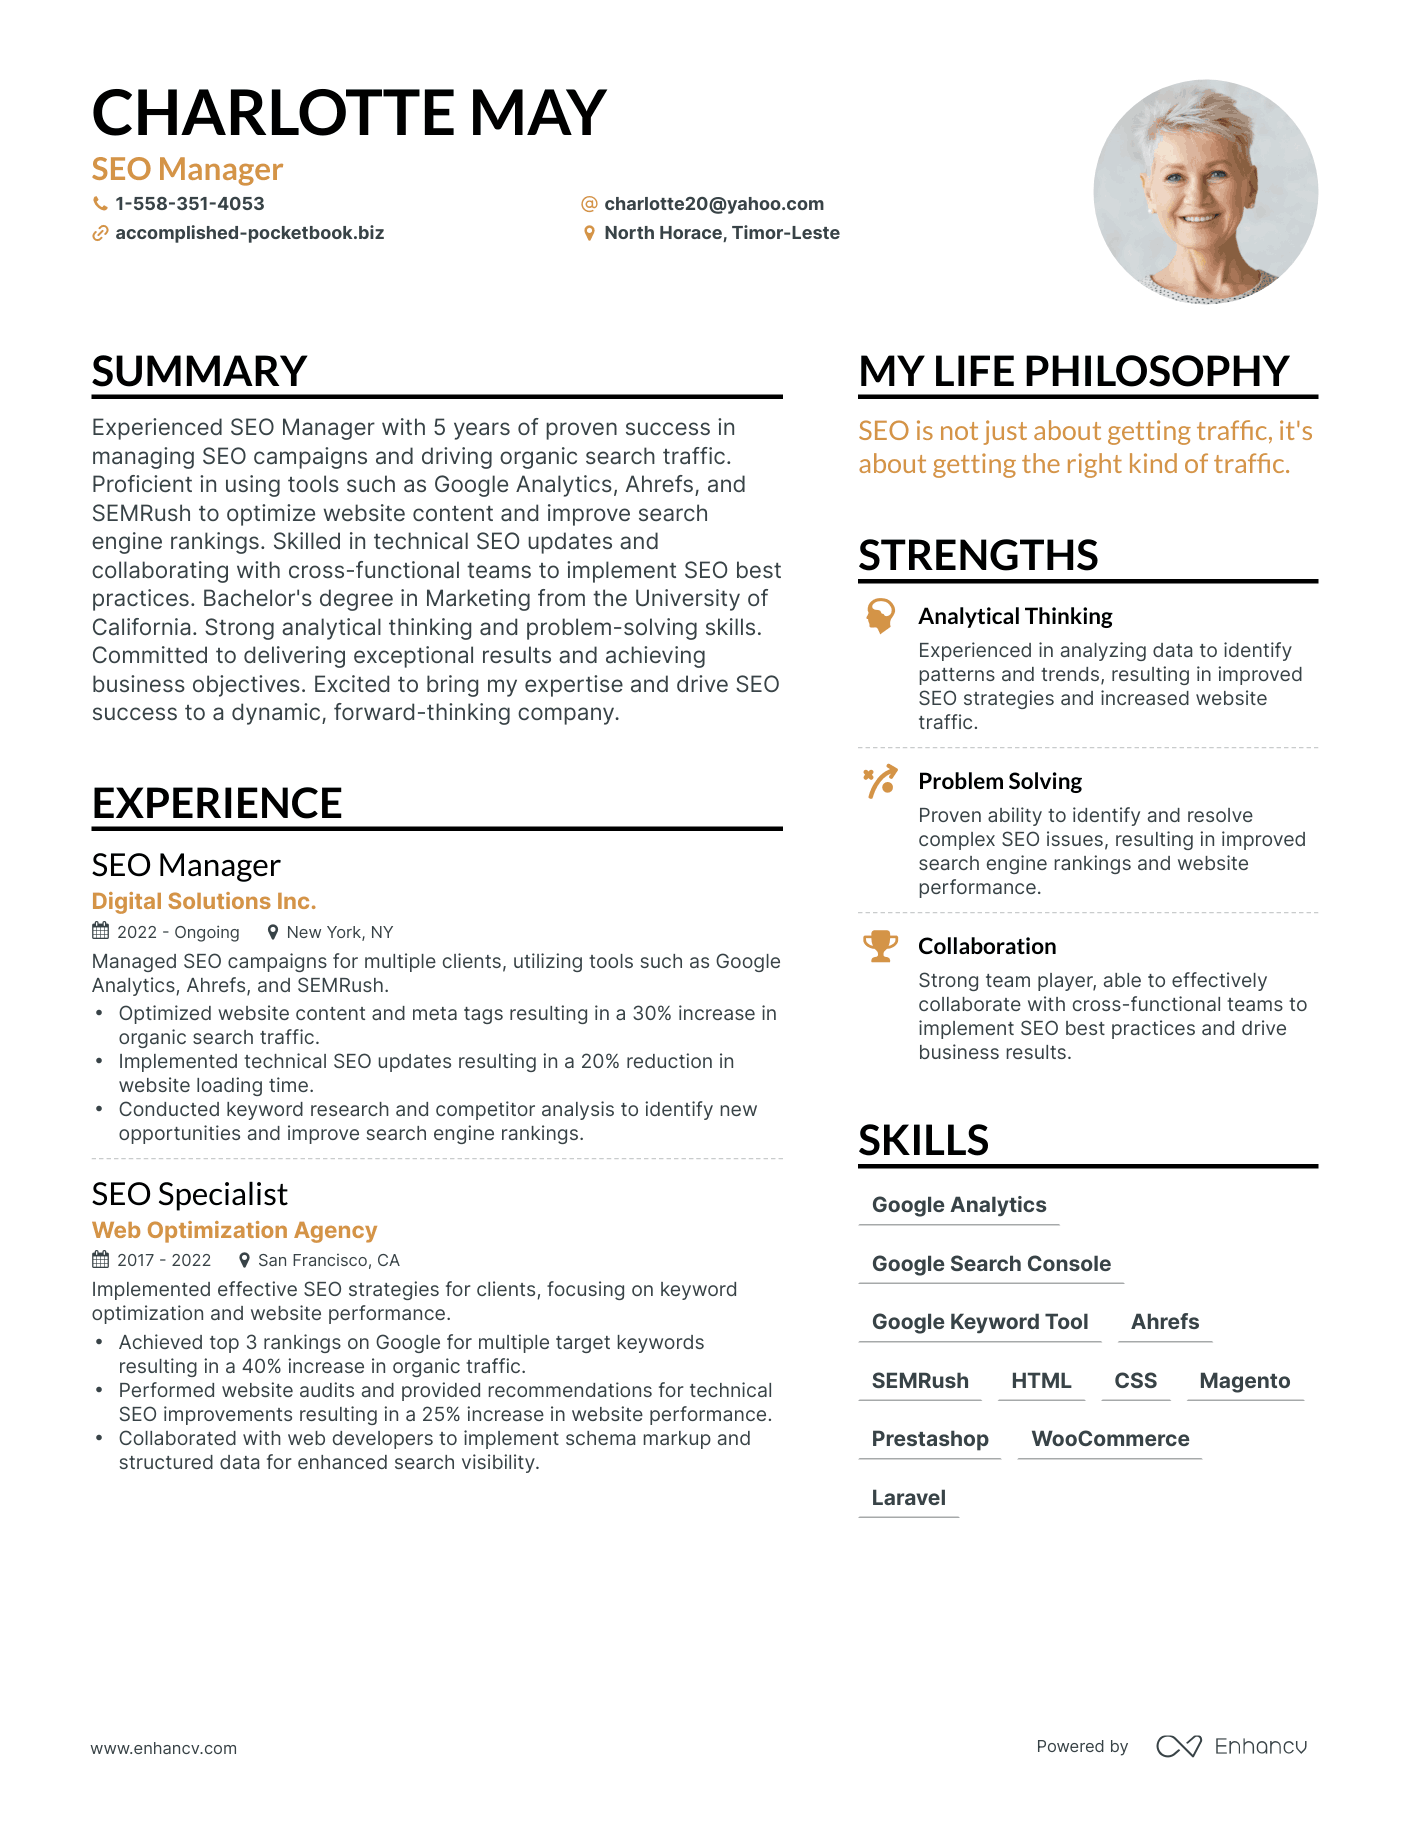 SEO Manager resume example